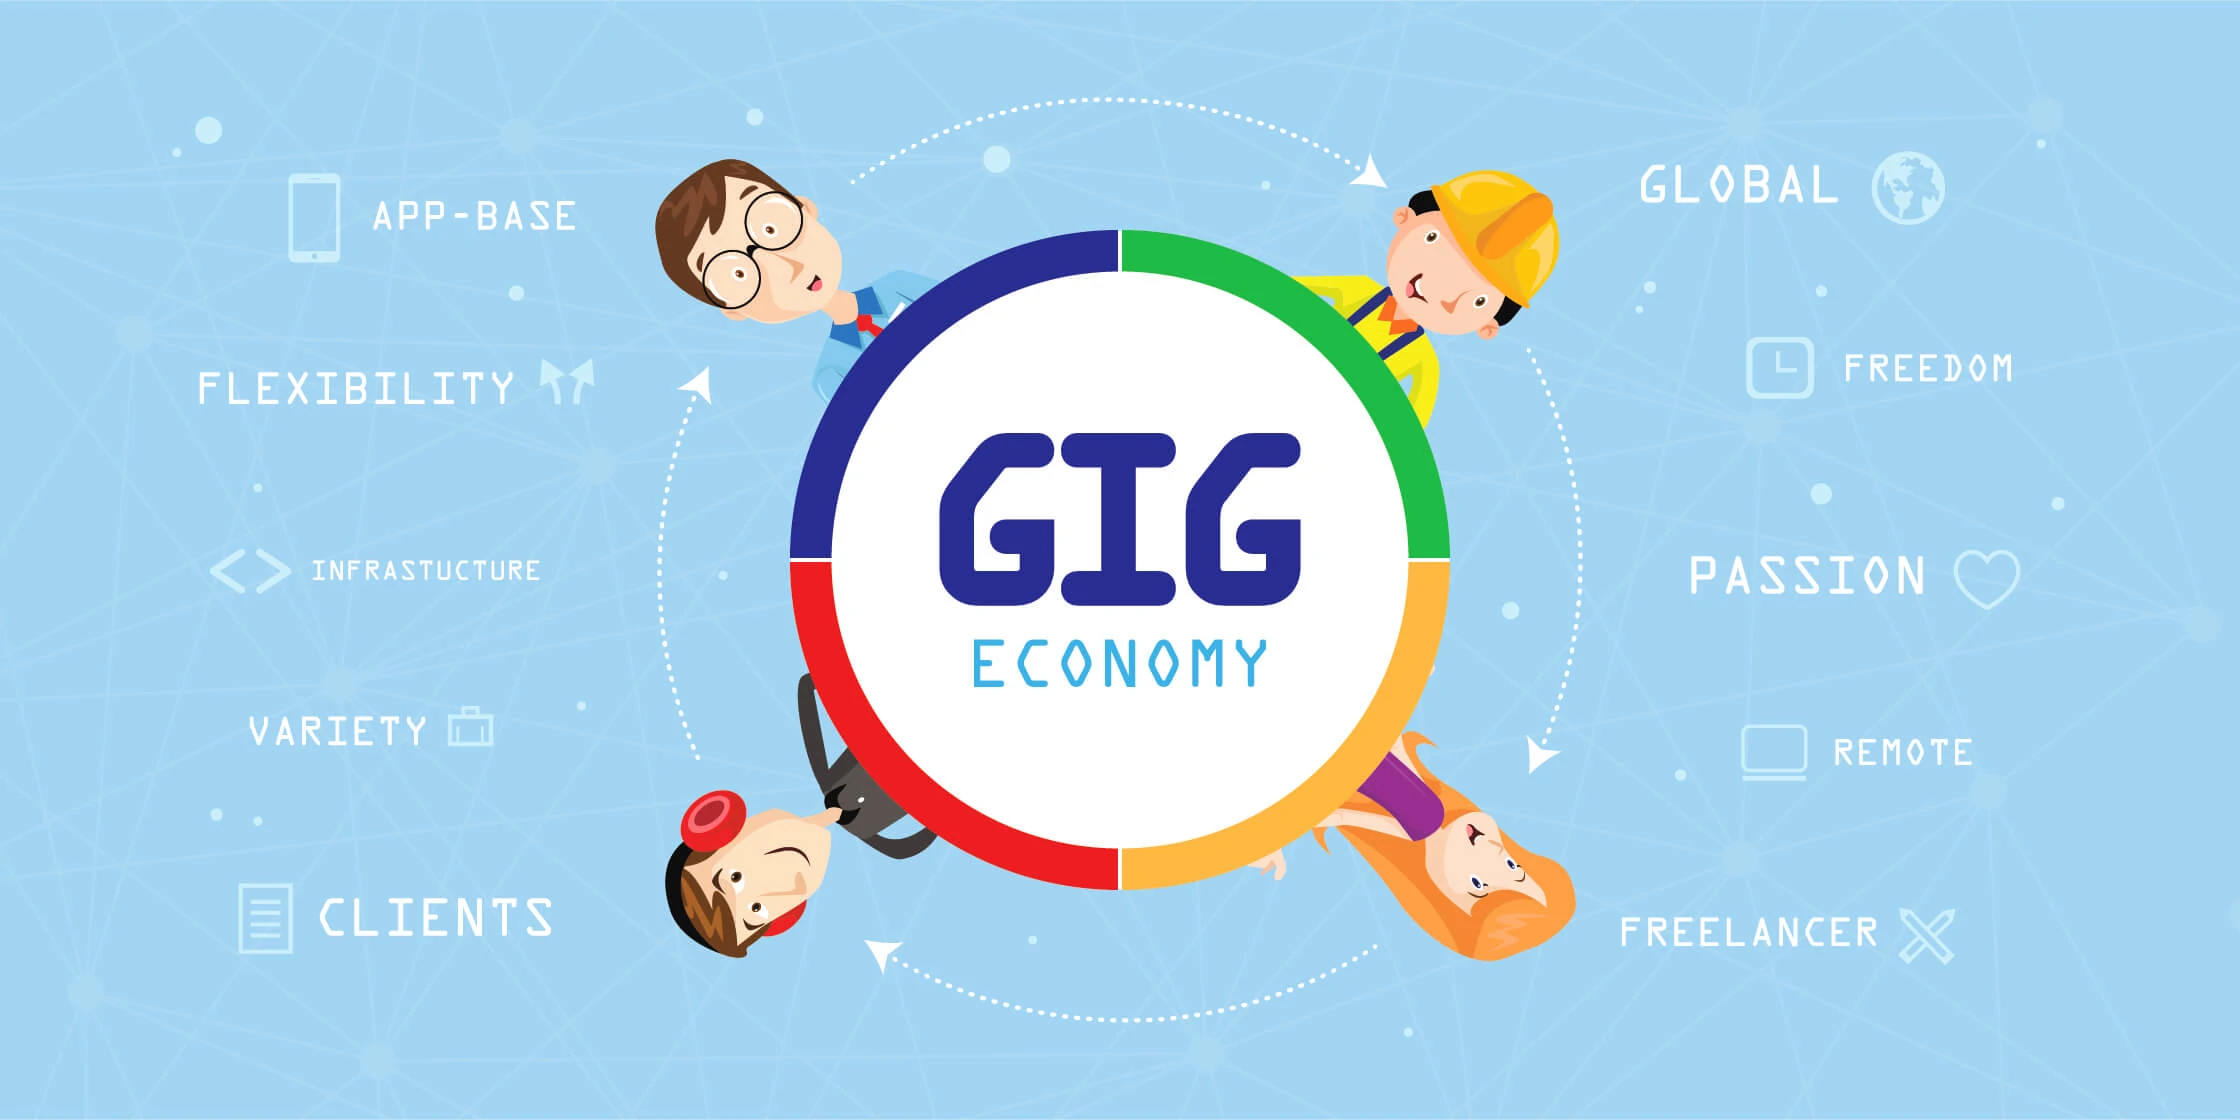 Growth of the Gig Economy